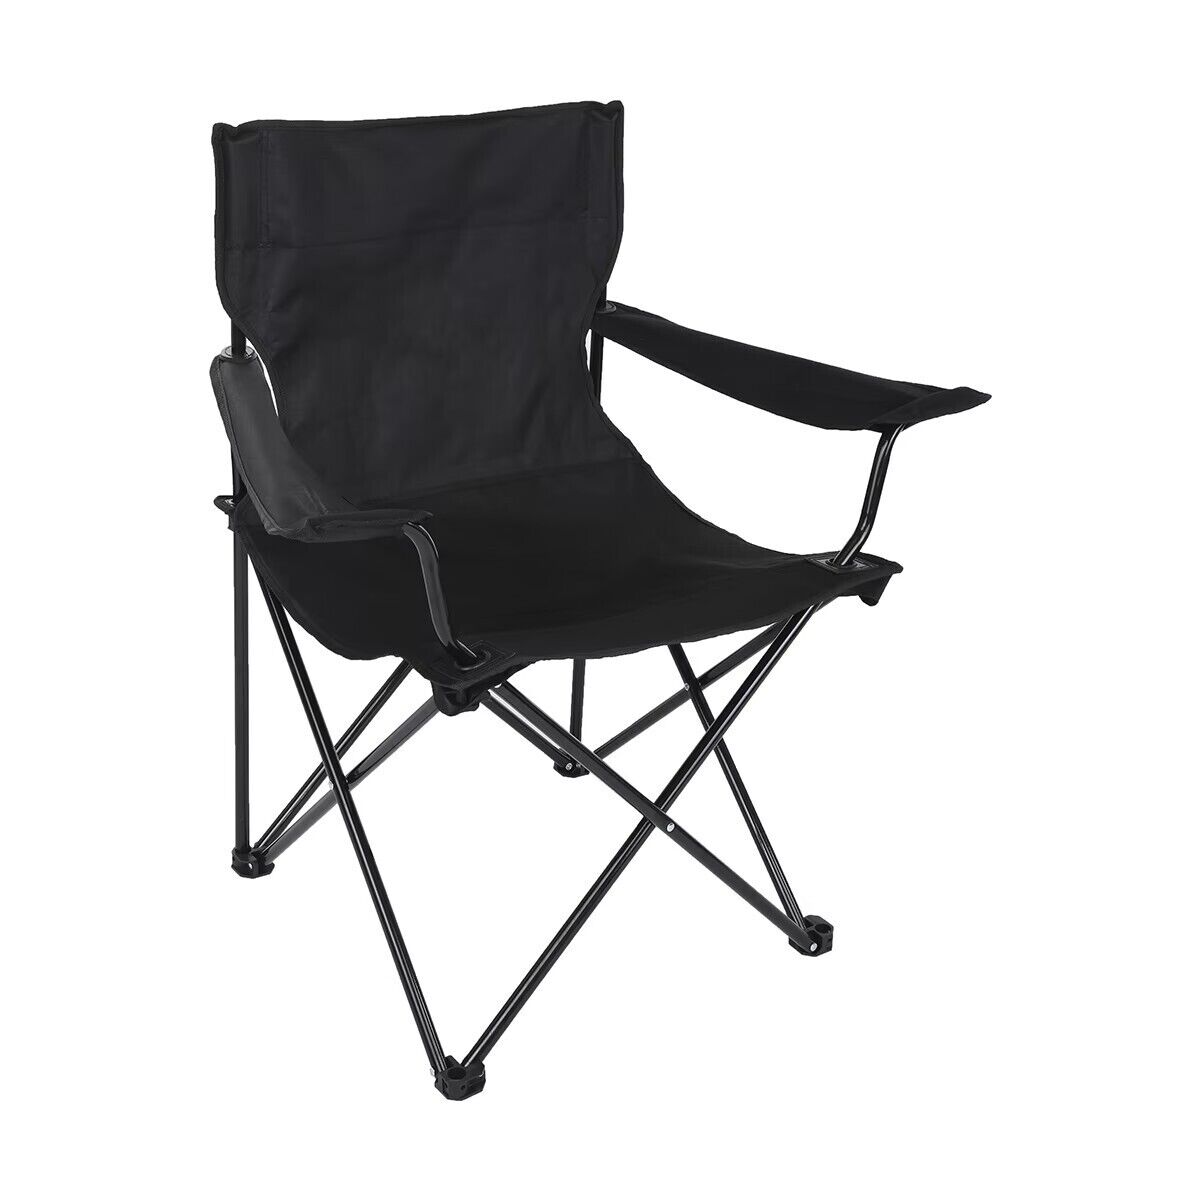 Basic Camp Chair -Easy Foldable Camping Chair Outdoor Backyard Camping Accessory